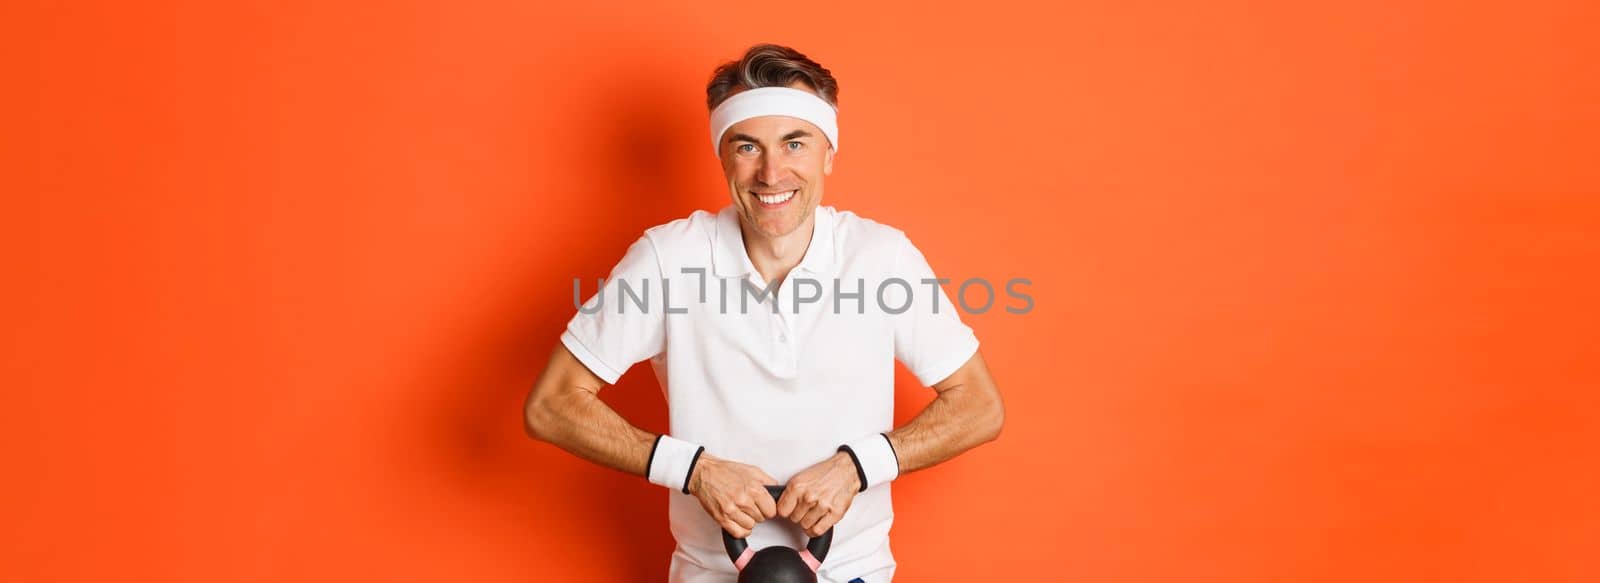 Concept of workout, gym and lifestyle. Image of handsome middle-aged guy doing sport exercises, lifting kettlebell and smiling, standing over orange background.